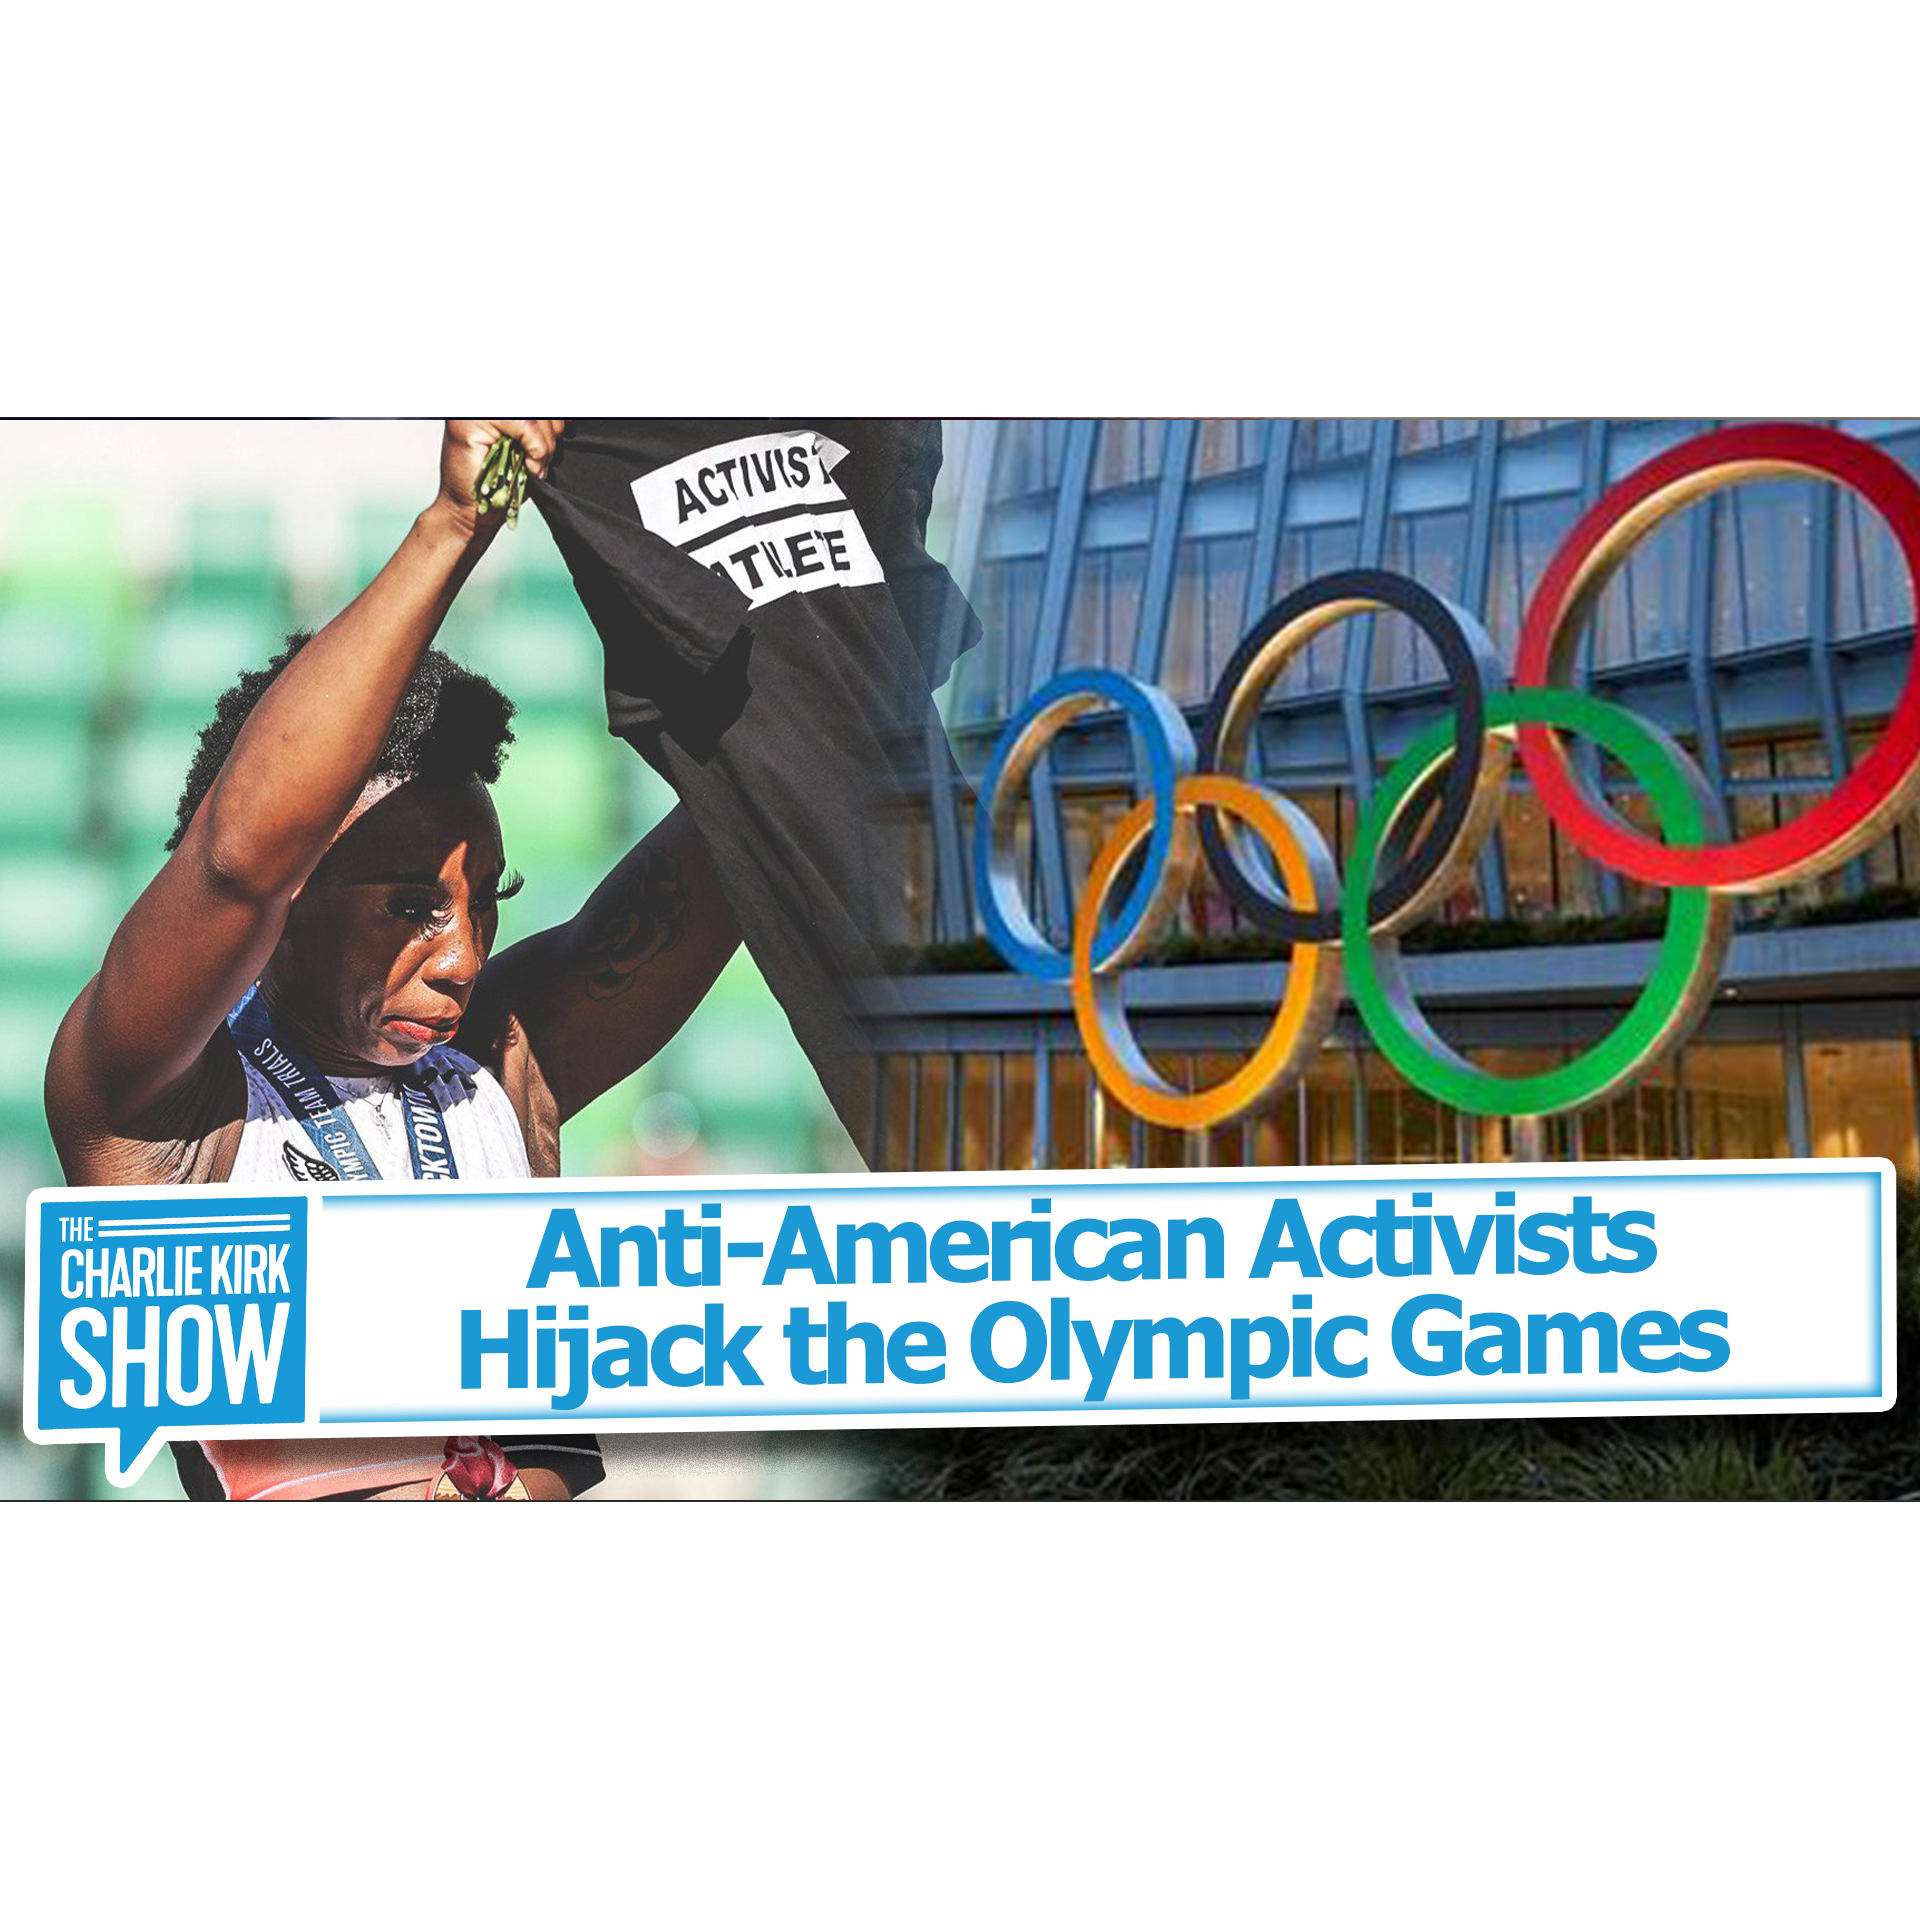 Anti-American Activists Hijack the Olympic Games